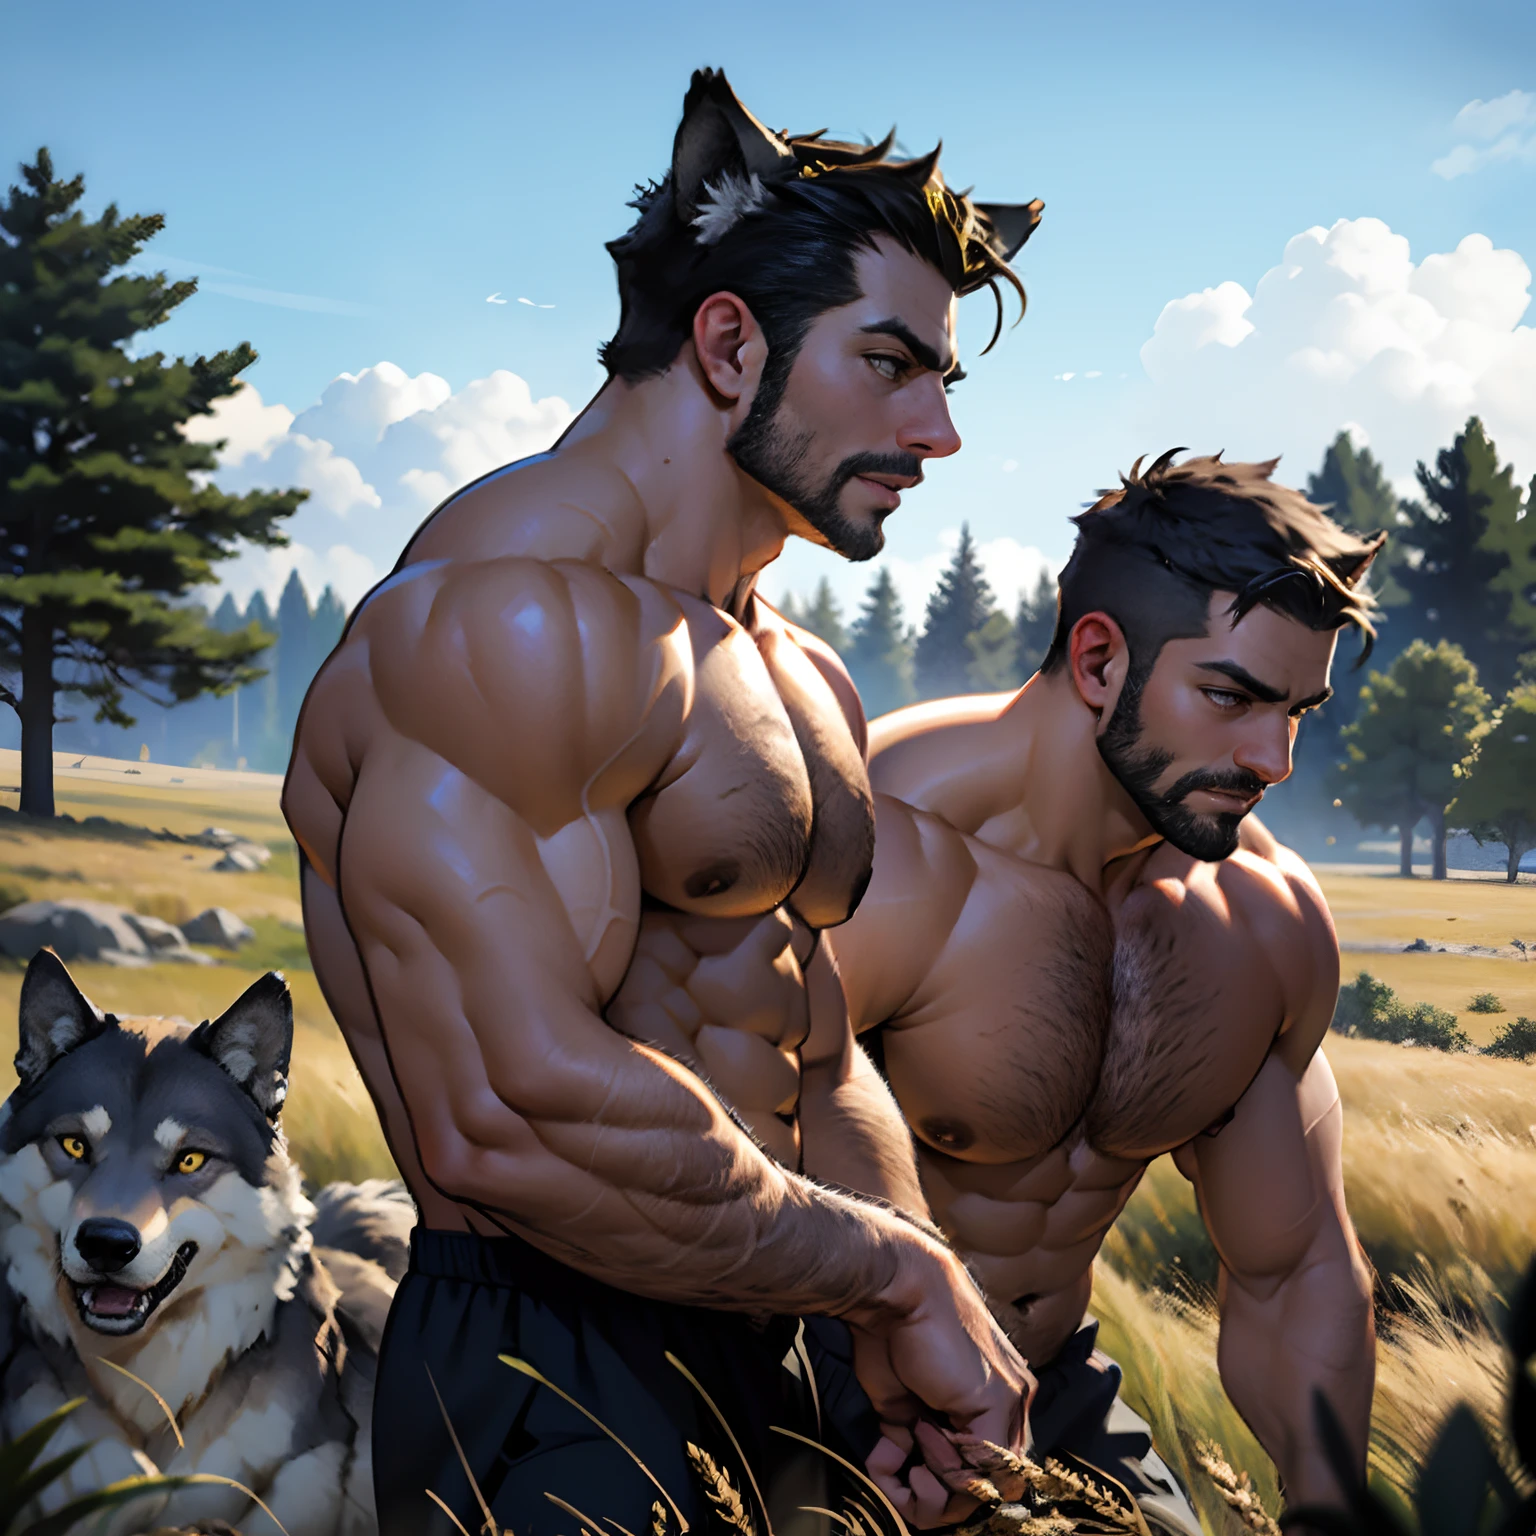 30 years old, The male, Fully naked, stubbles, Huge muscles, Mature man, Muscle swelling, Bodybuilding, chest muscles, Abs, Natural light, Wheat-colored skin, 1人, Wolverine, Naked, werecreature, Predators and prey, Hunting, Run an empty field, Side view, Wolves as pets, Men have wolf ears, Displays a side view of the entire body, The wolf cub is following the man, wide - angle shot, Best quality, Highly detailed, Chase sheep, Frightened sheep